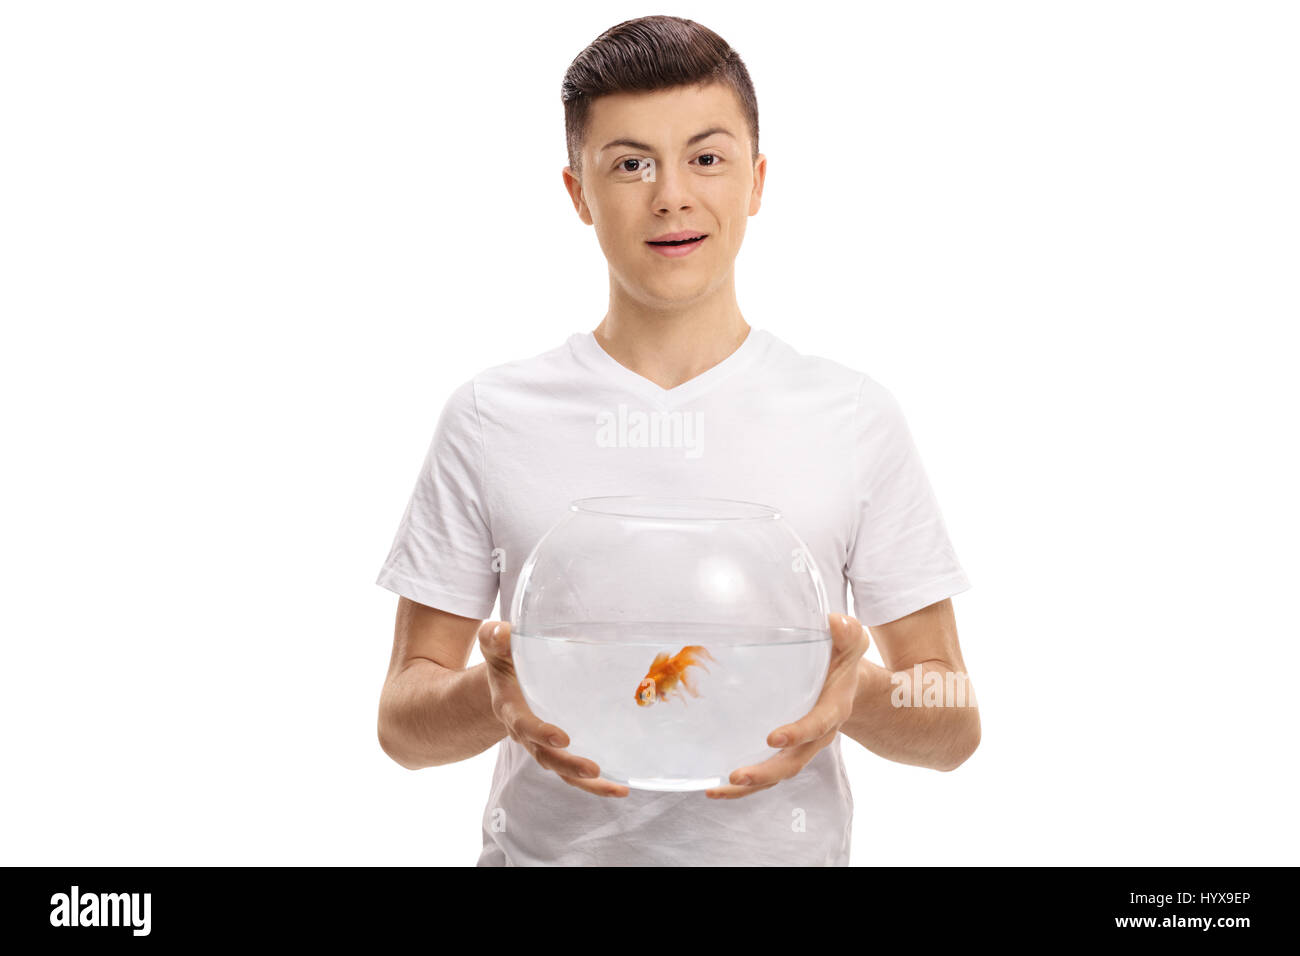 Teenager holding a bowl with a goldfish inside isolated on white background Stock Photo